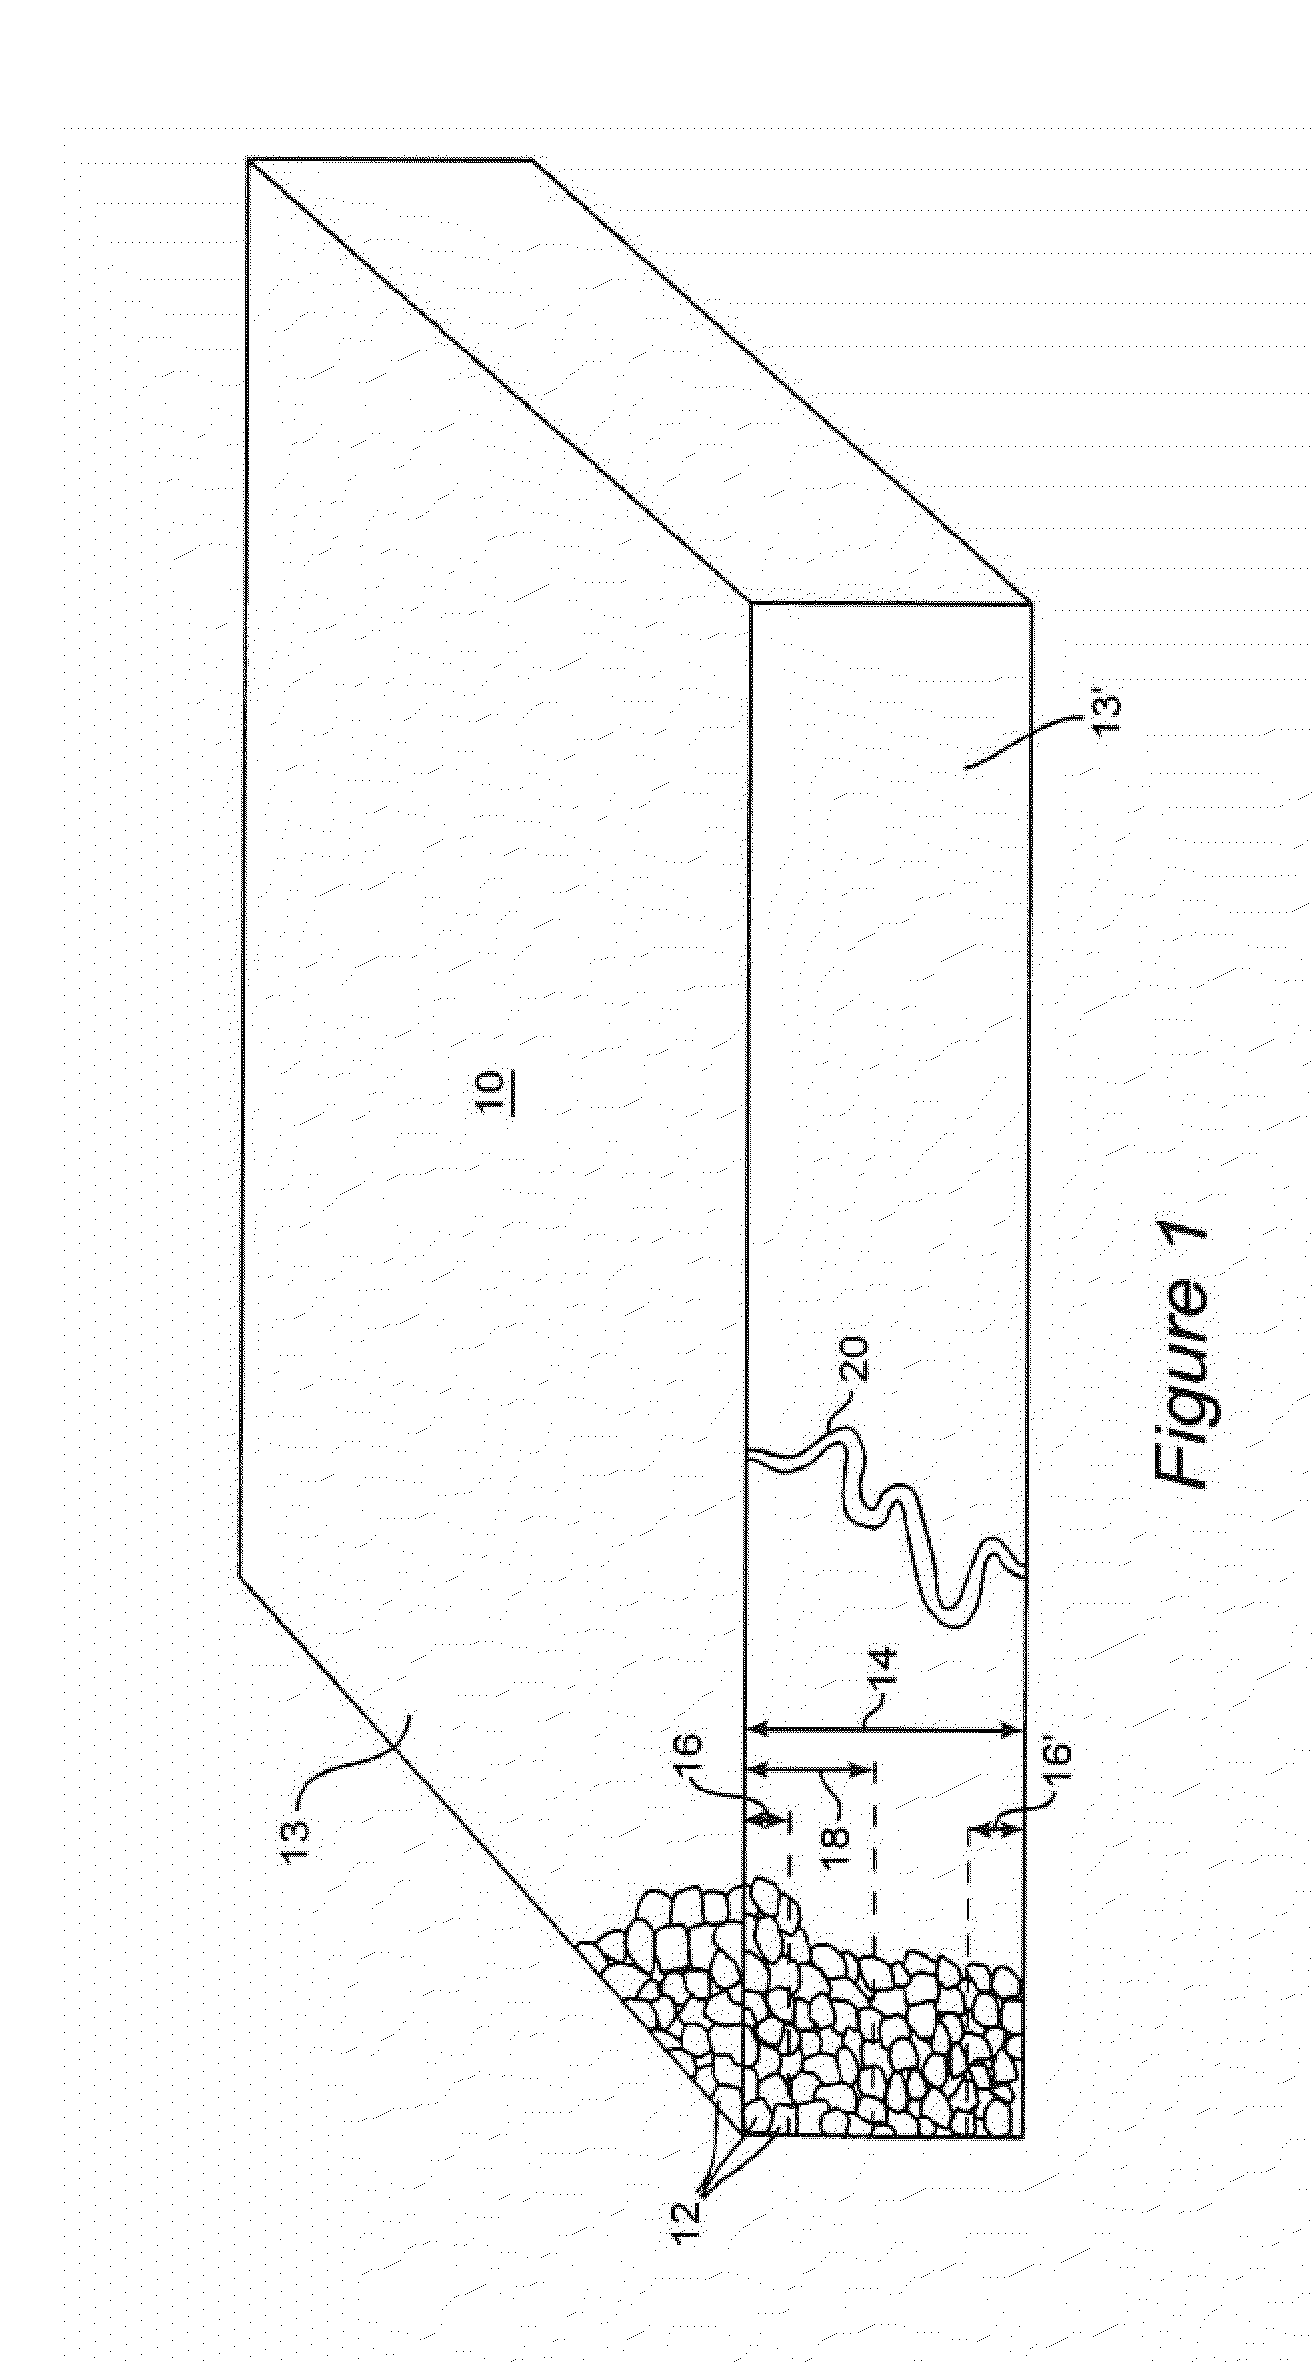 Open pore ceramic matrix coated with metal or metal alloys and methods of making same